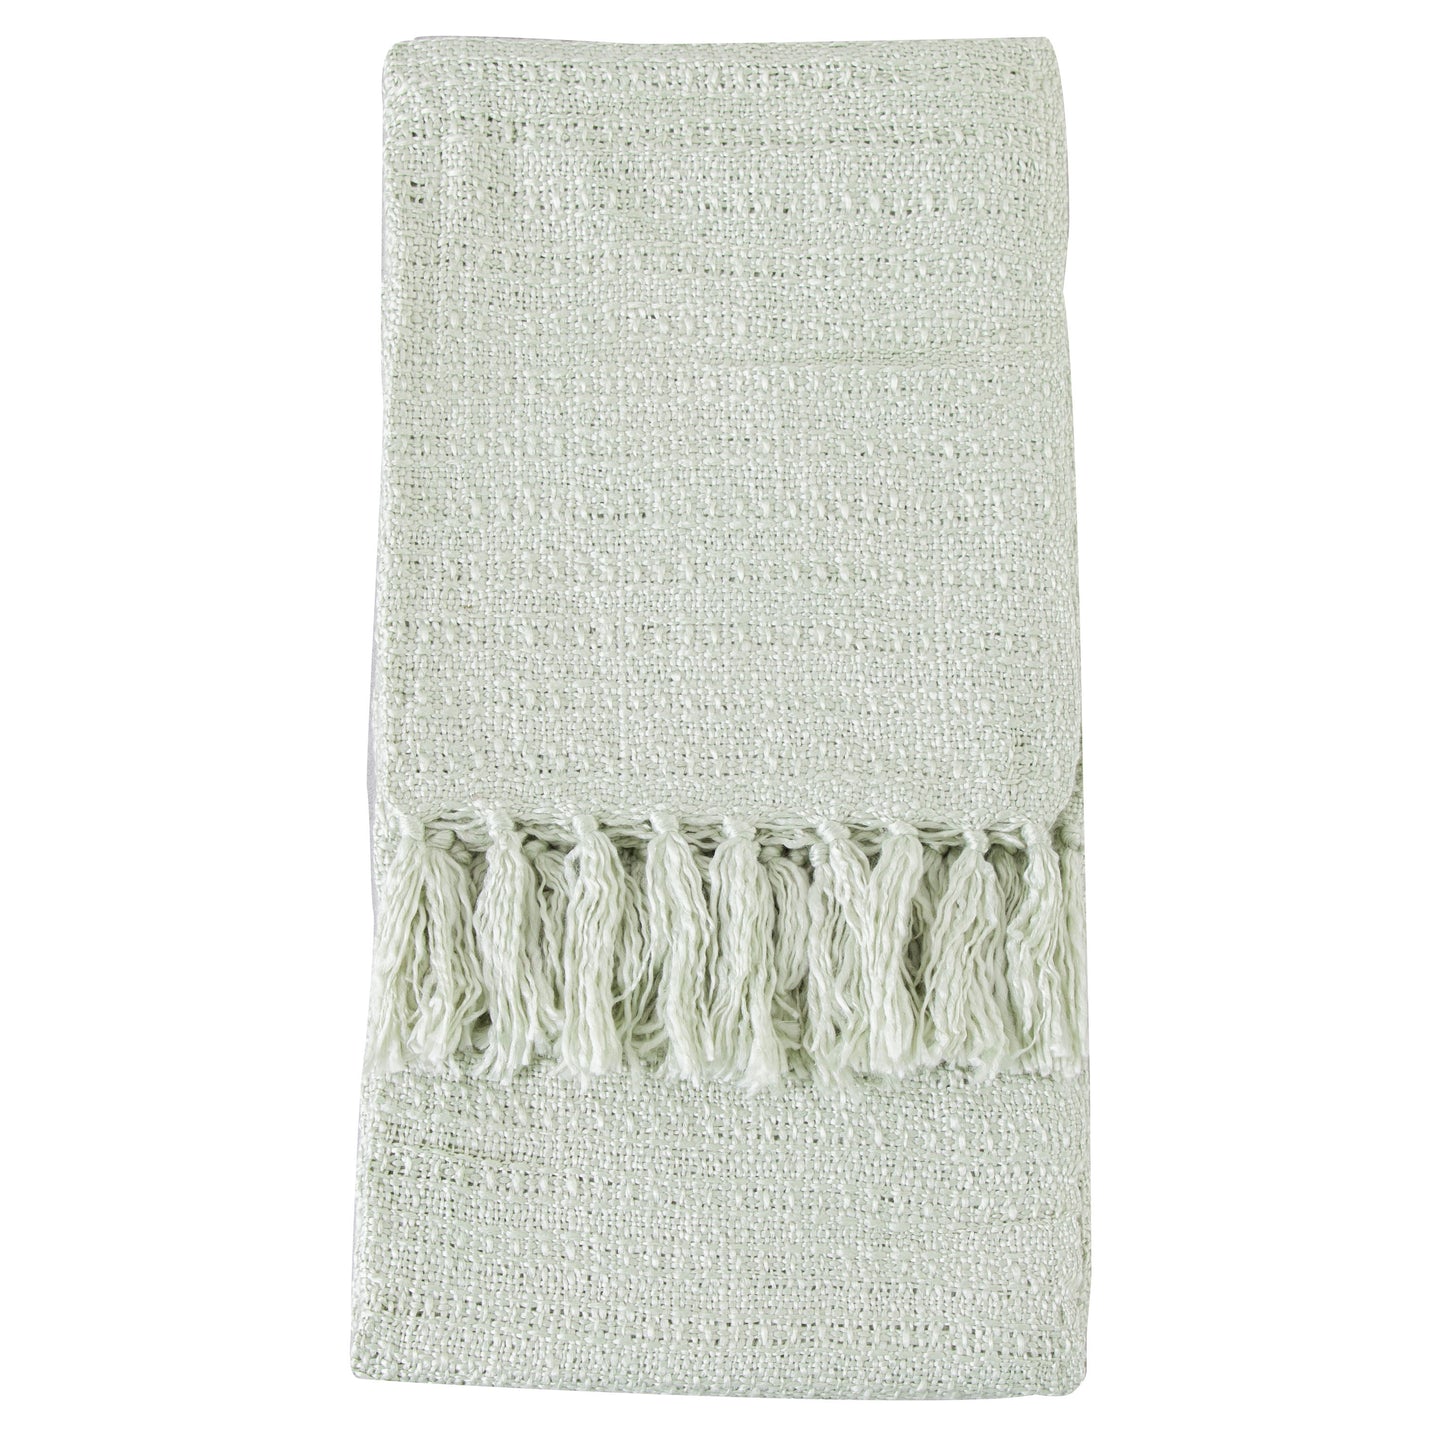 An Acrylic Textured Throw Green 1300x1700mm with fringes on a white background for interior decor.